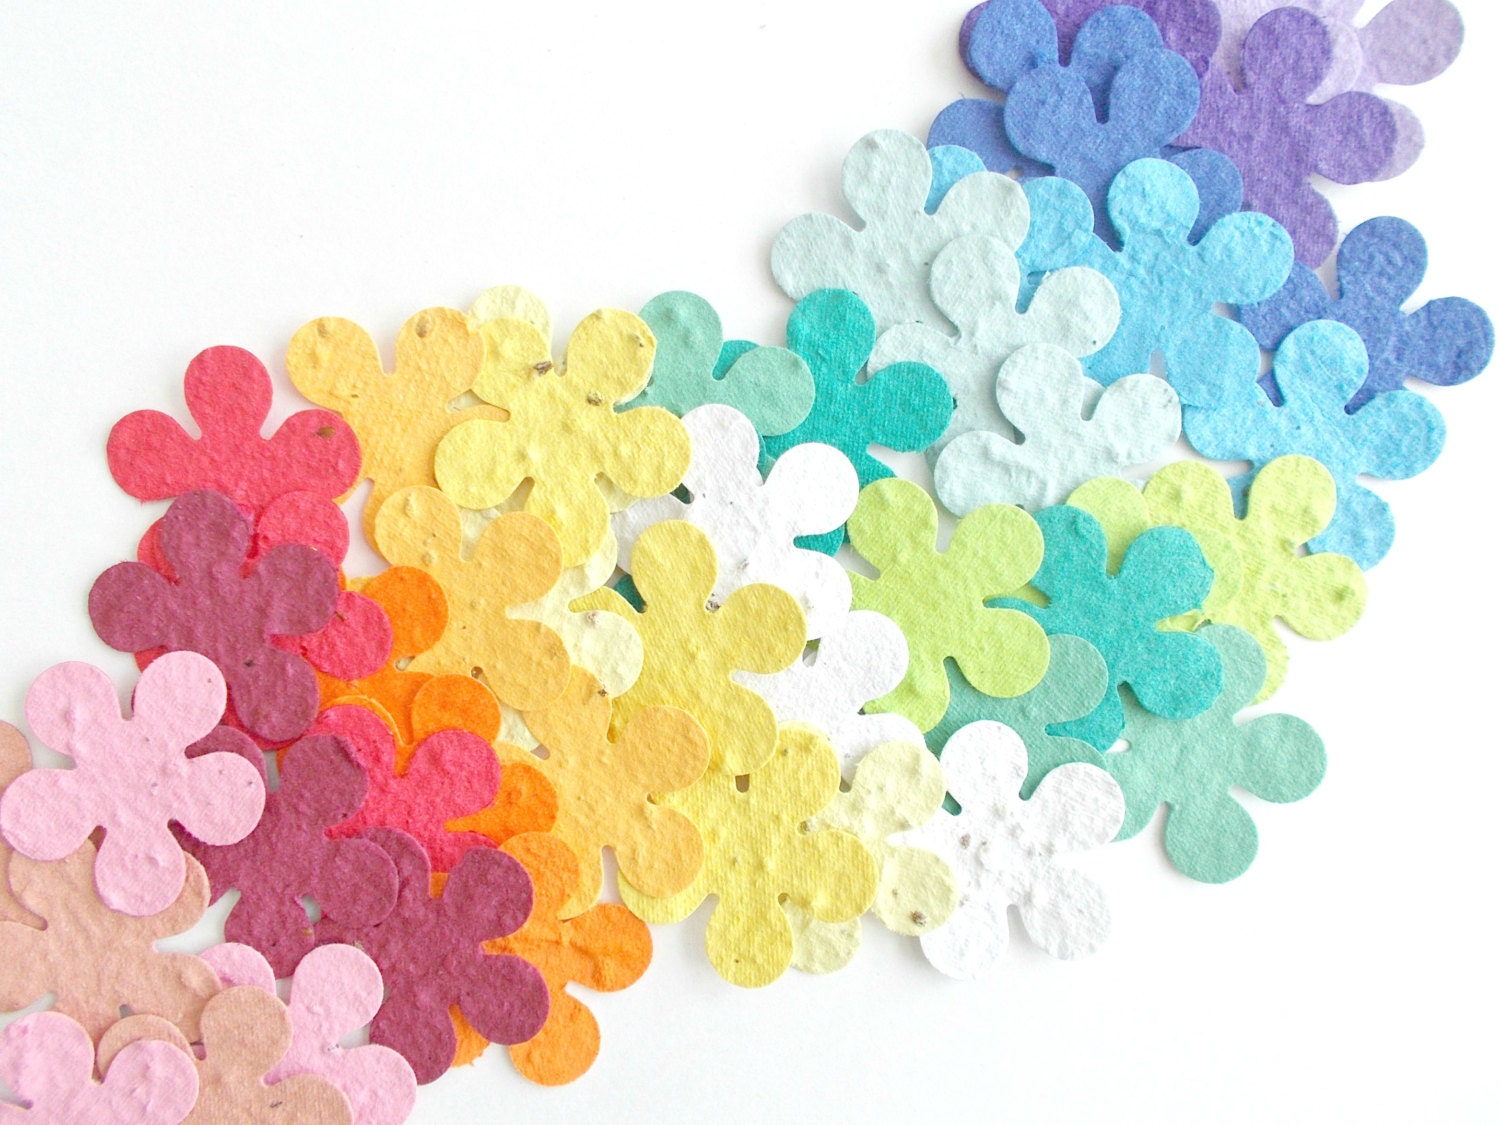 100 Large Plantable Paper Flower Confetti - Wedding, Shower and Party Decoration - Your Choice of Colors